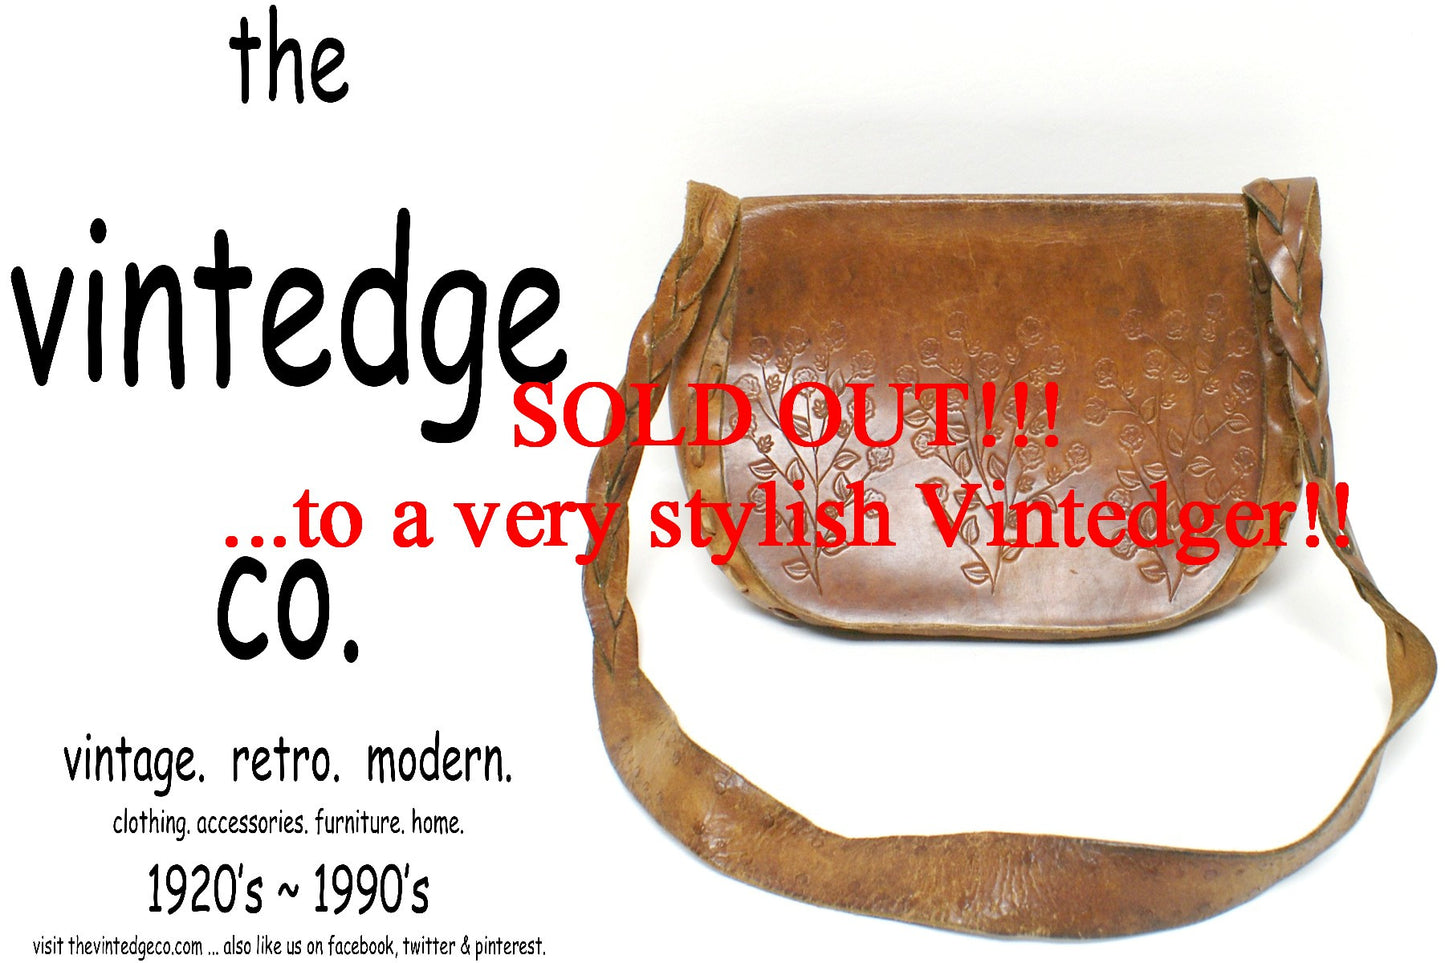 SOLD - Vintage 60s Tooled Purse The Vintedge Co.